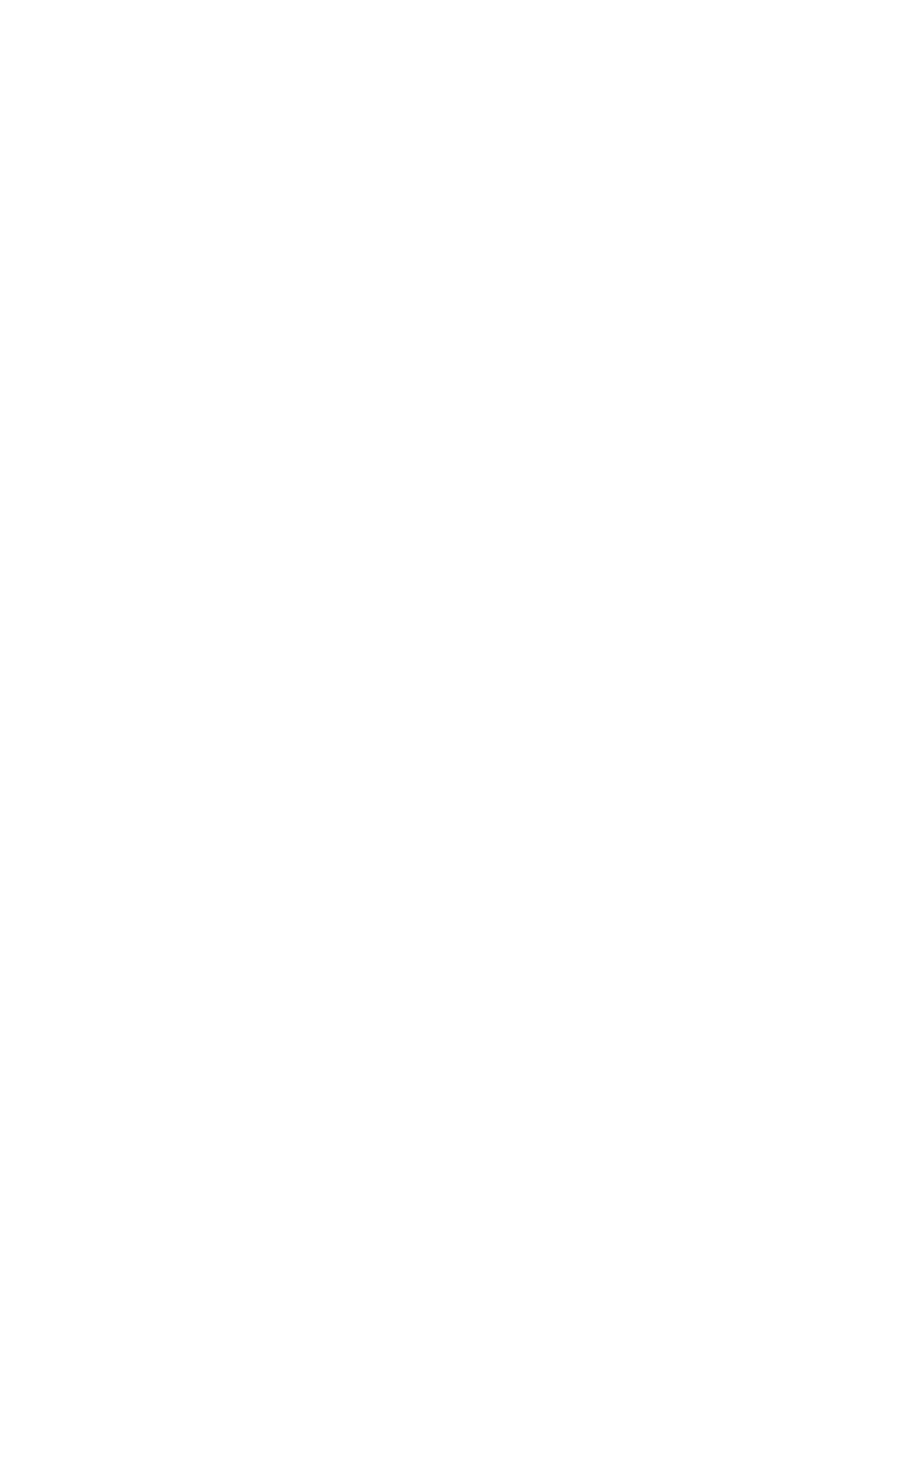 Diverse and innovative